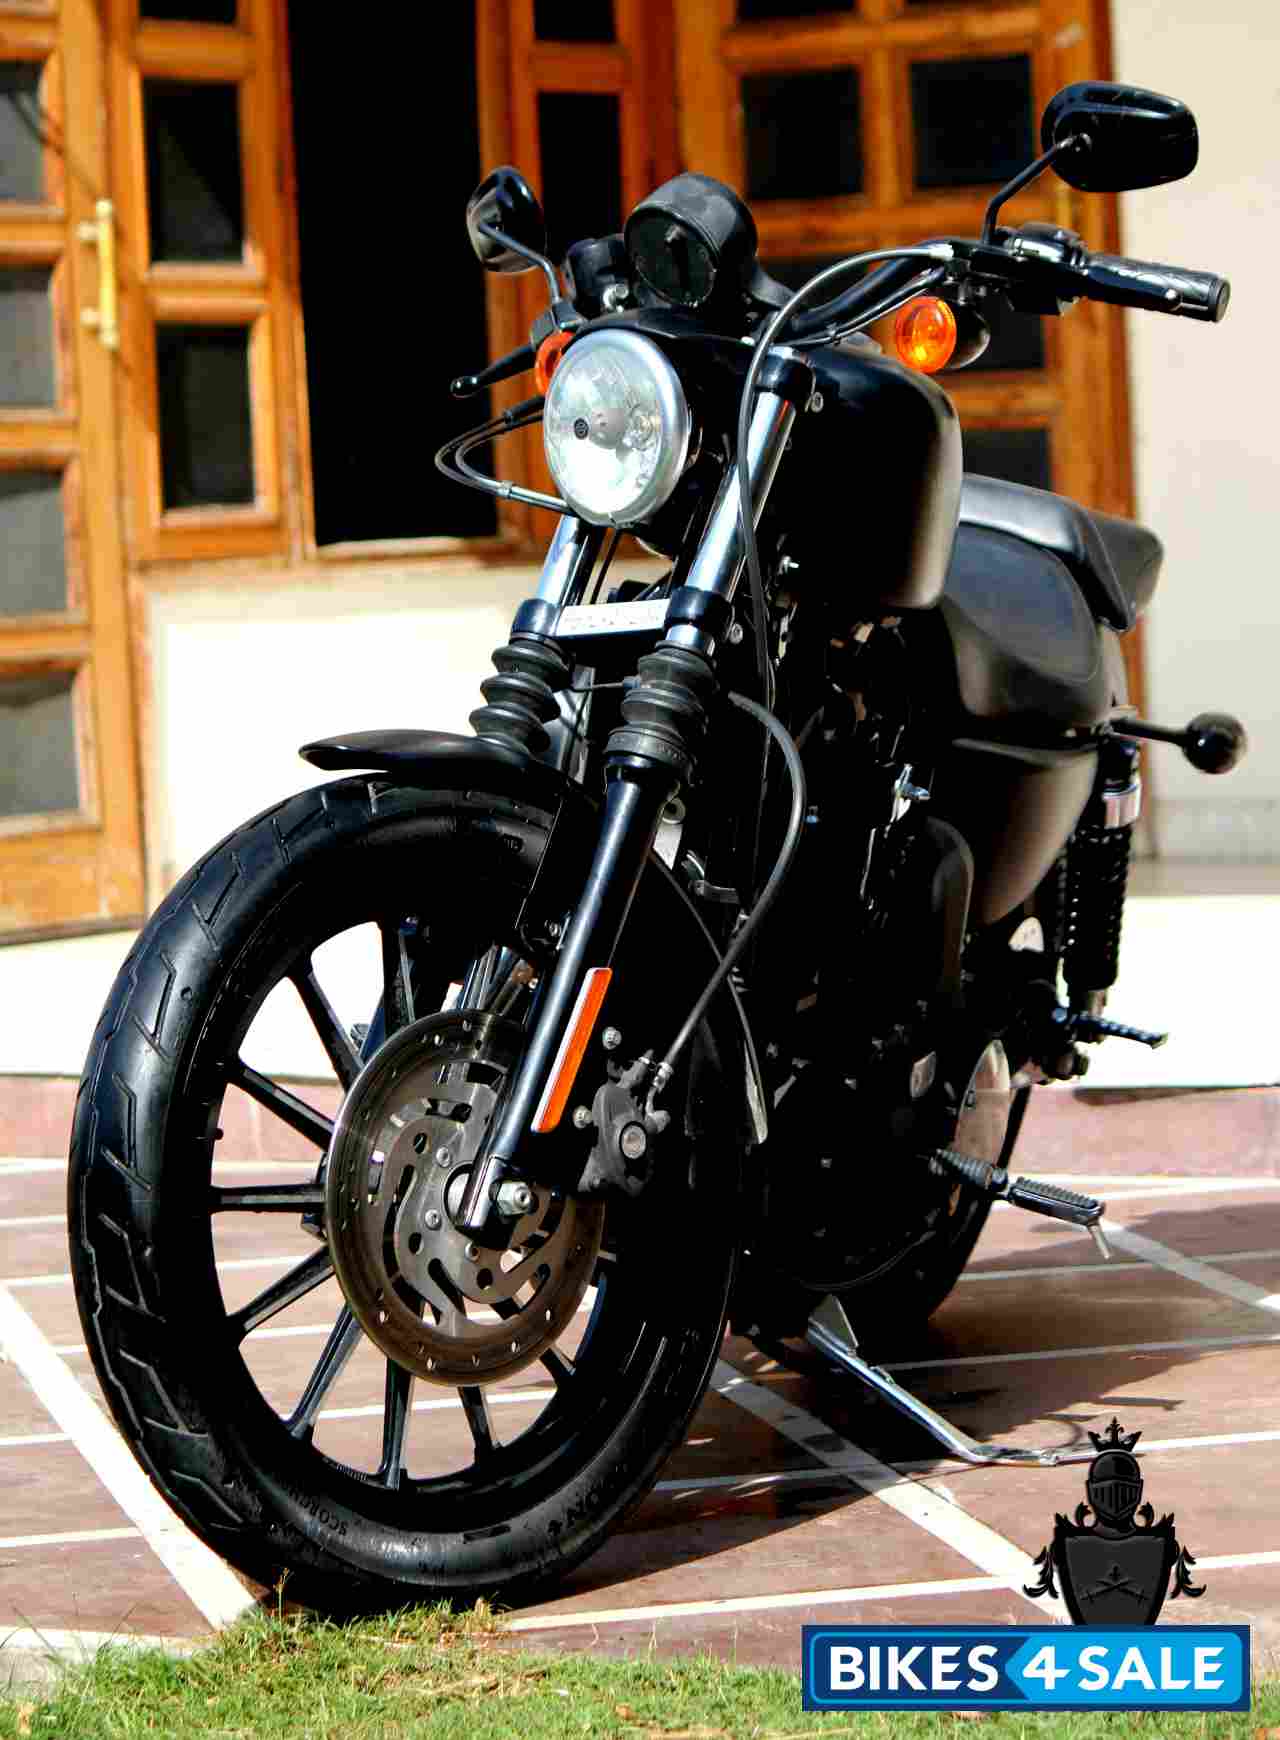 Used 2013 Model Harley Davidson Iron 883 For Sale In Chandigarh Id 191135 Matte Black Colour Bikes4sale